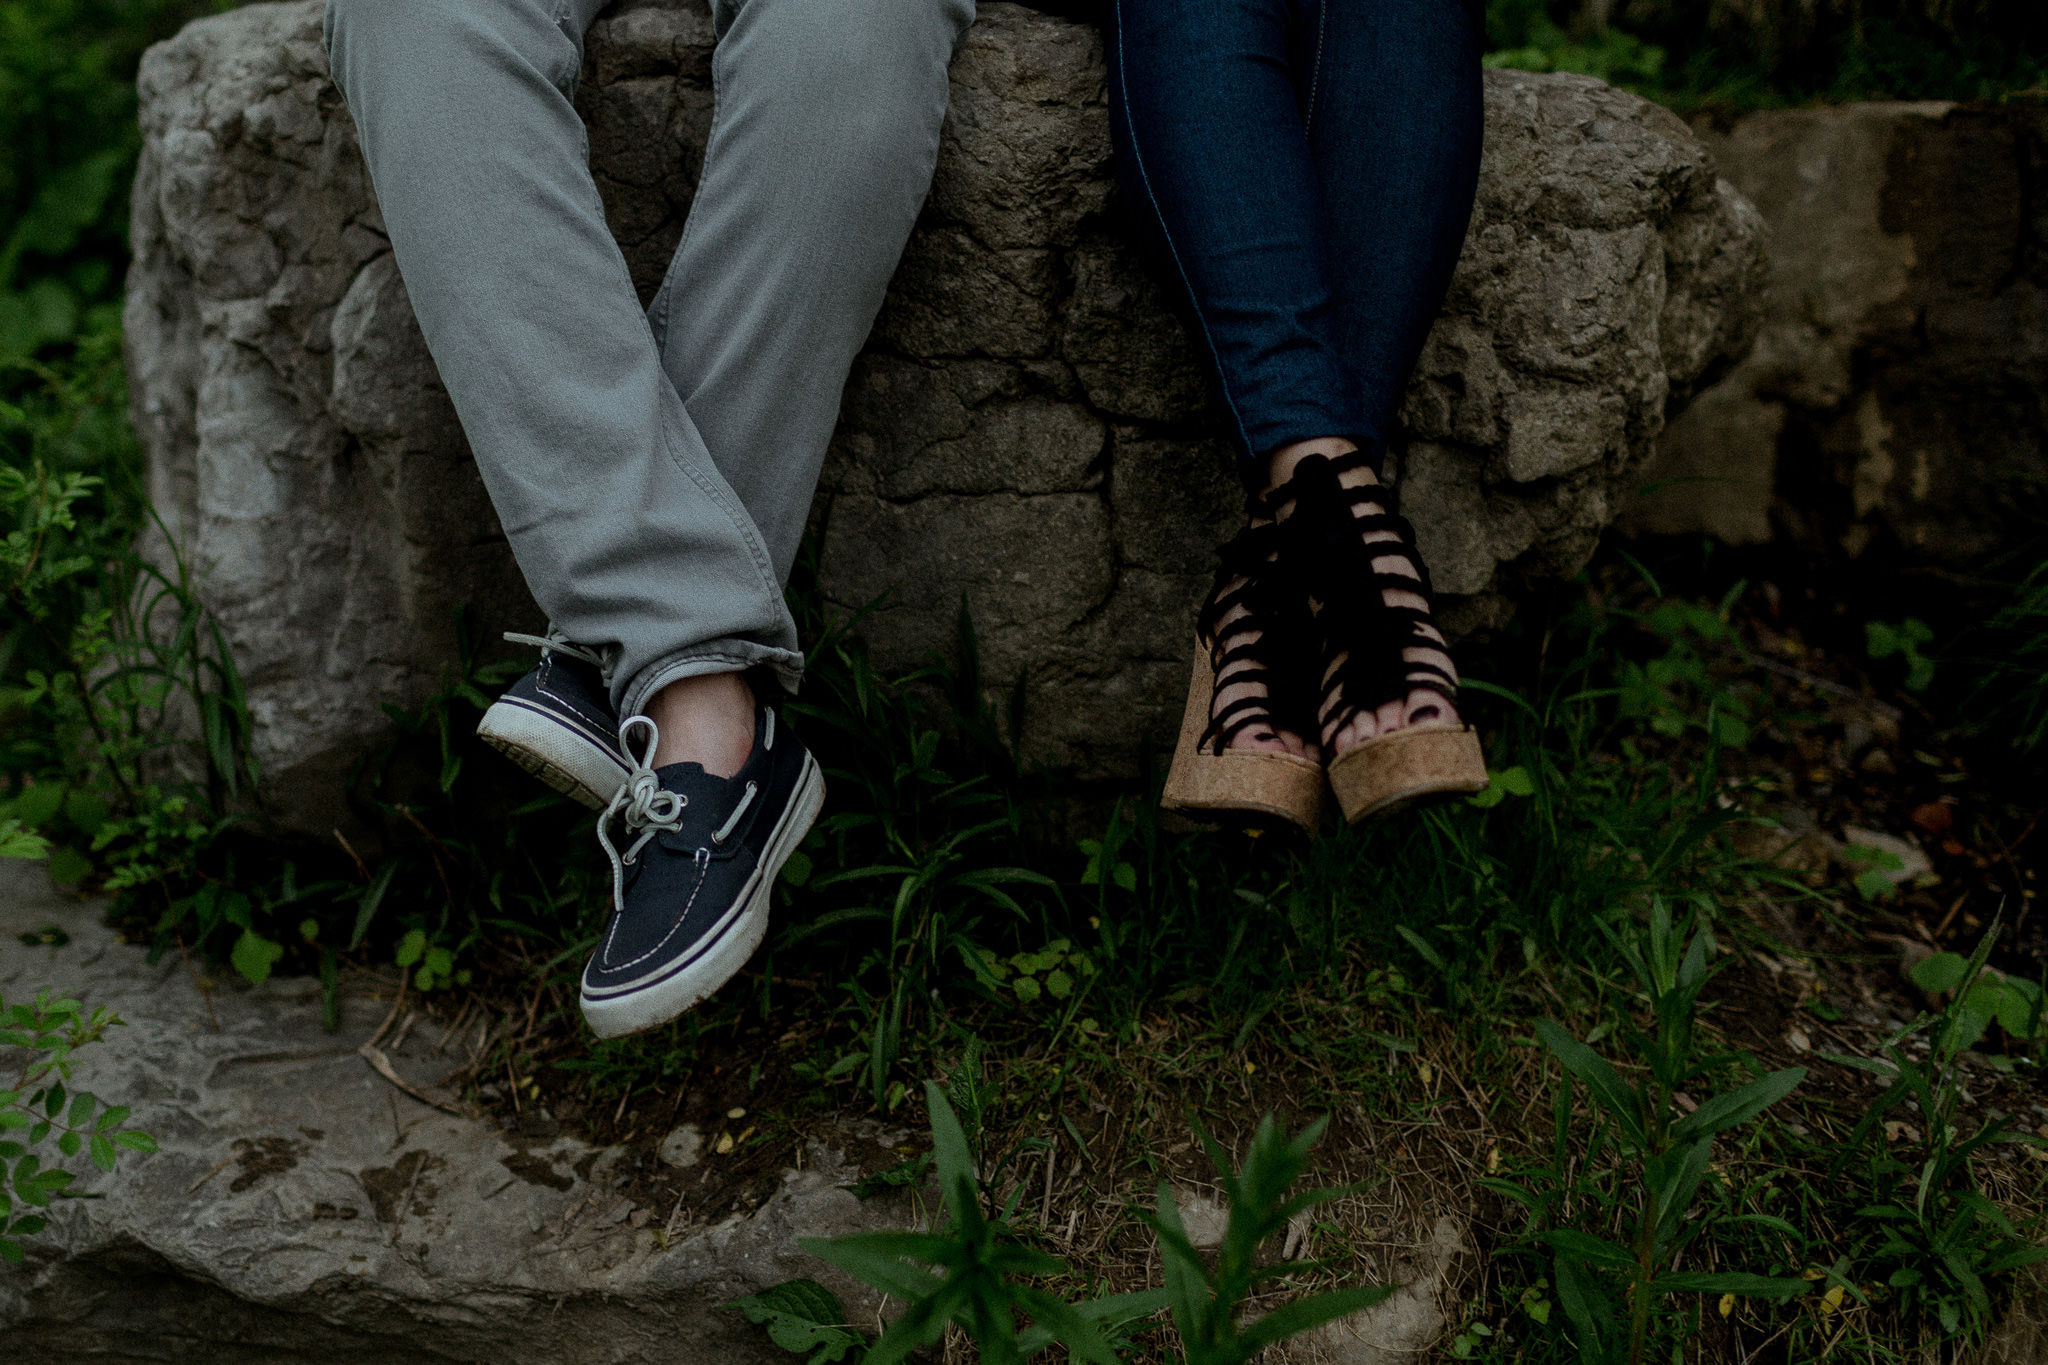 different engagement photography, his and hers shoes